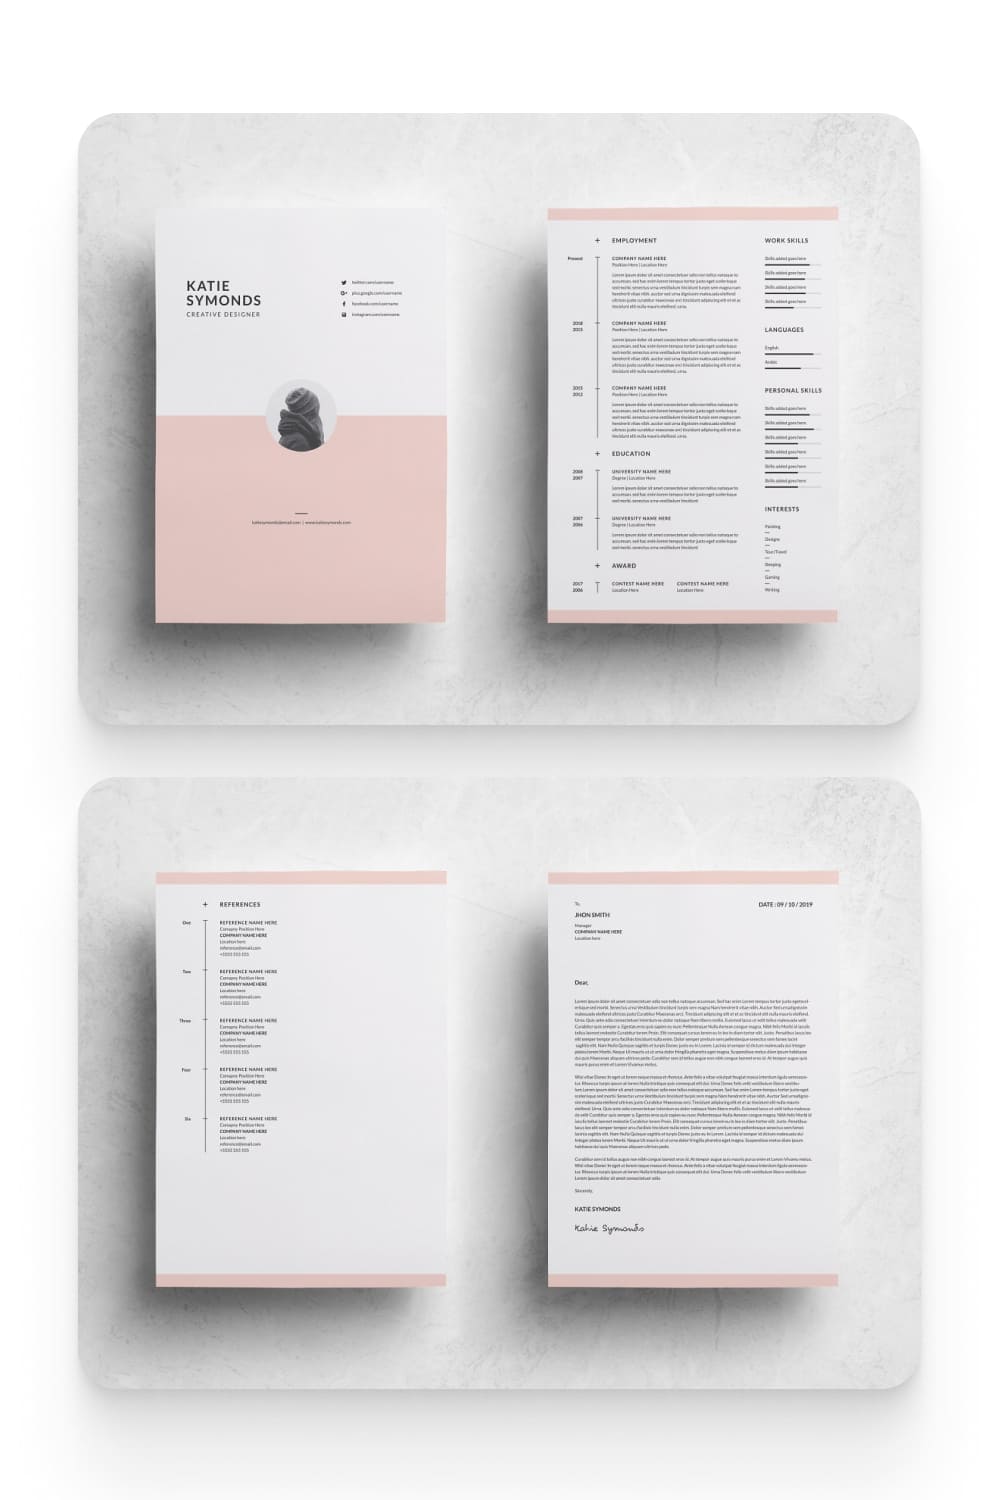 Collage of Resume Kit Images with Portfolio, Experience and Cover Letter.